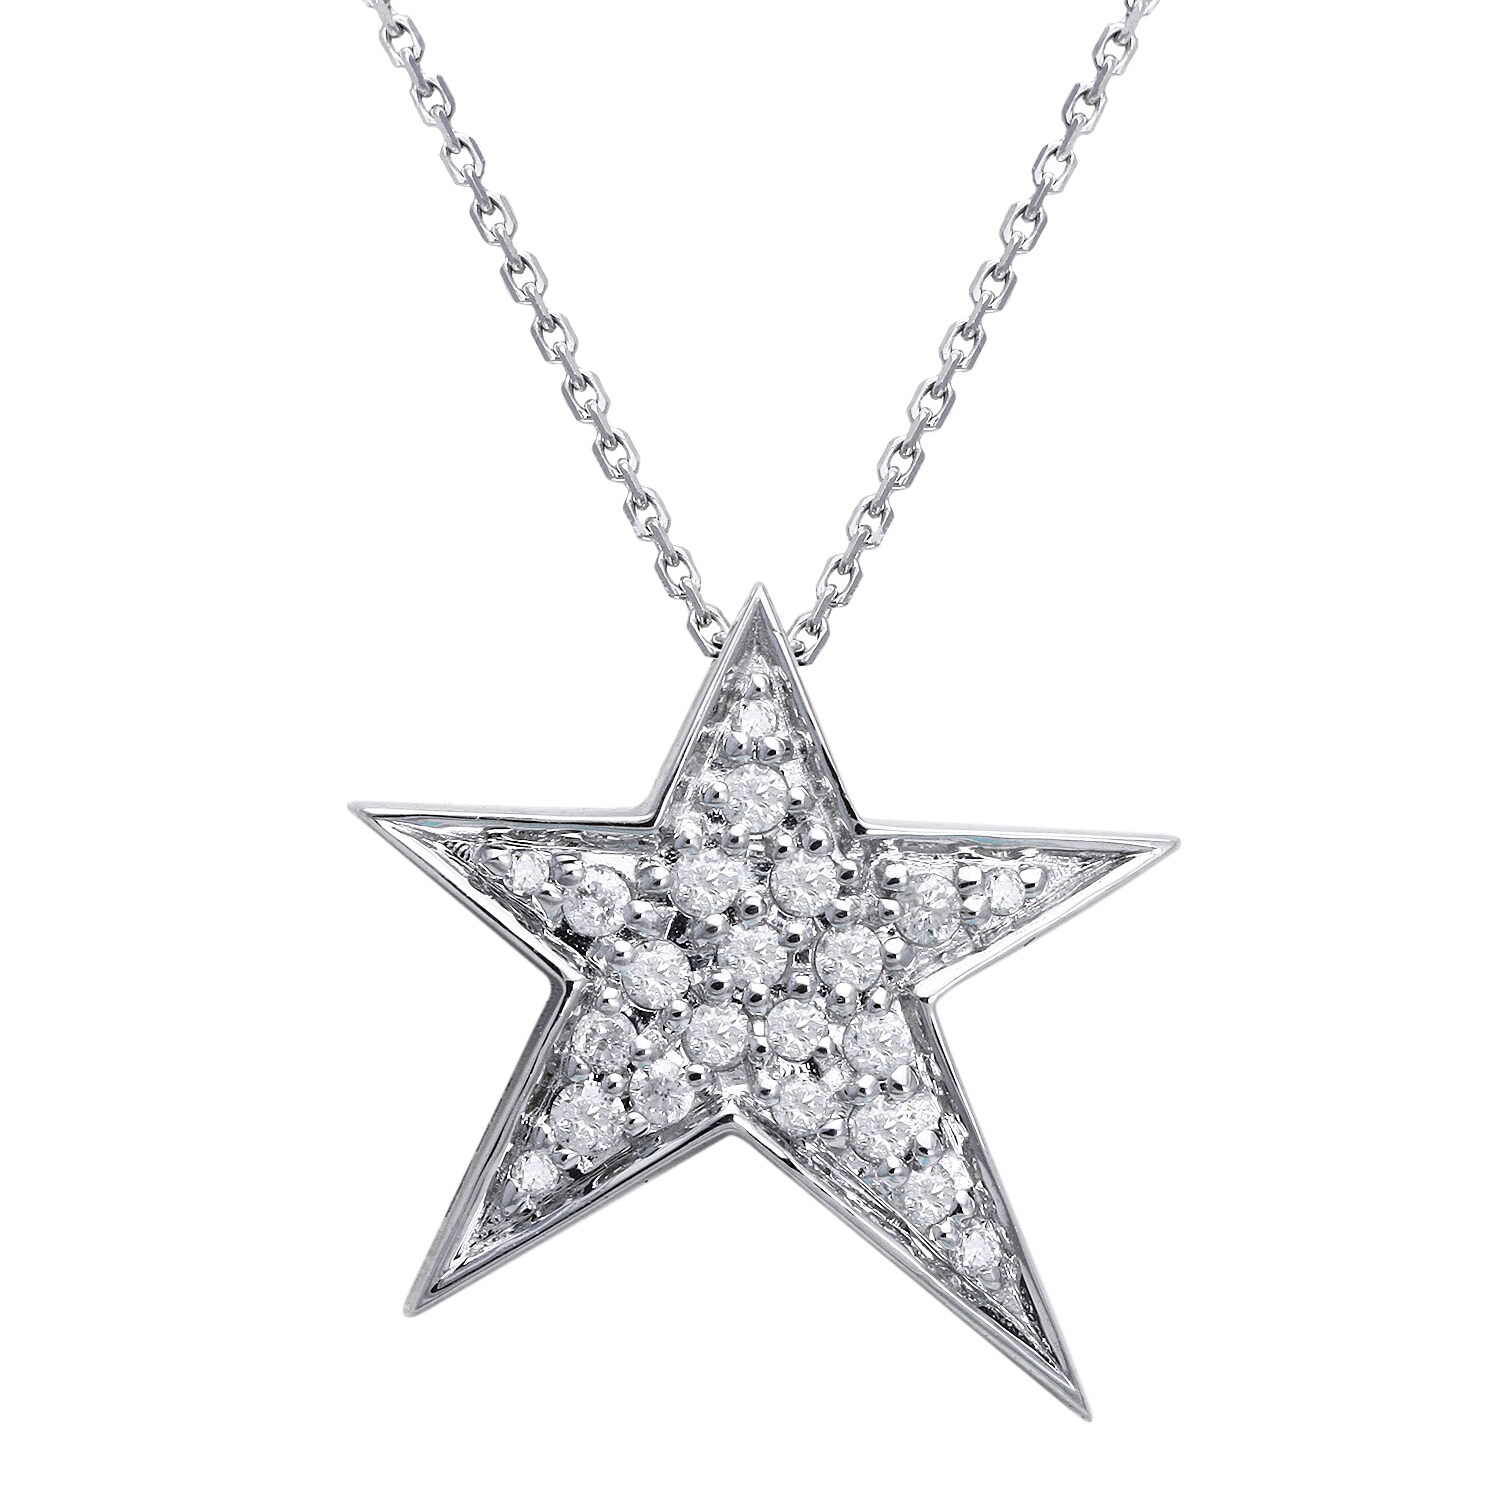 Shop 10k Gold 1/5ct TDW Diamond Star Necklace - On Sale - Free Shipping ...